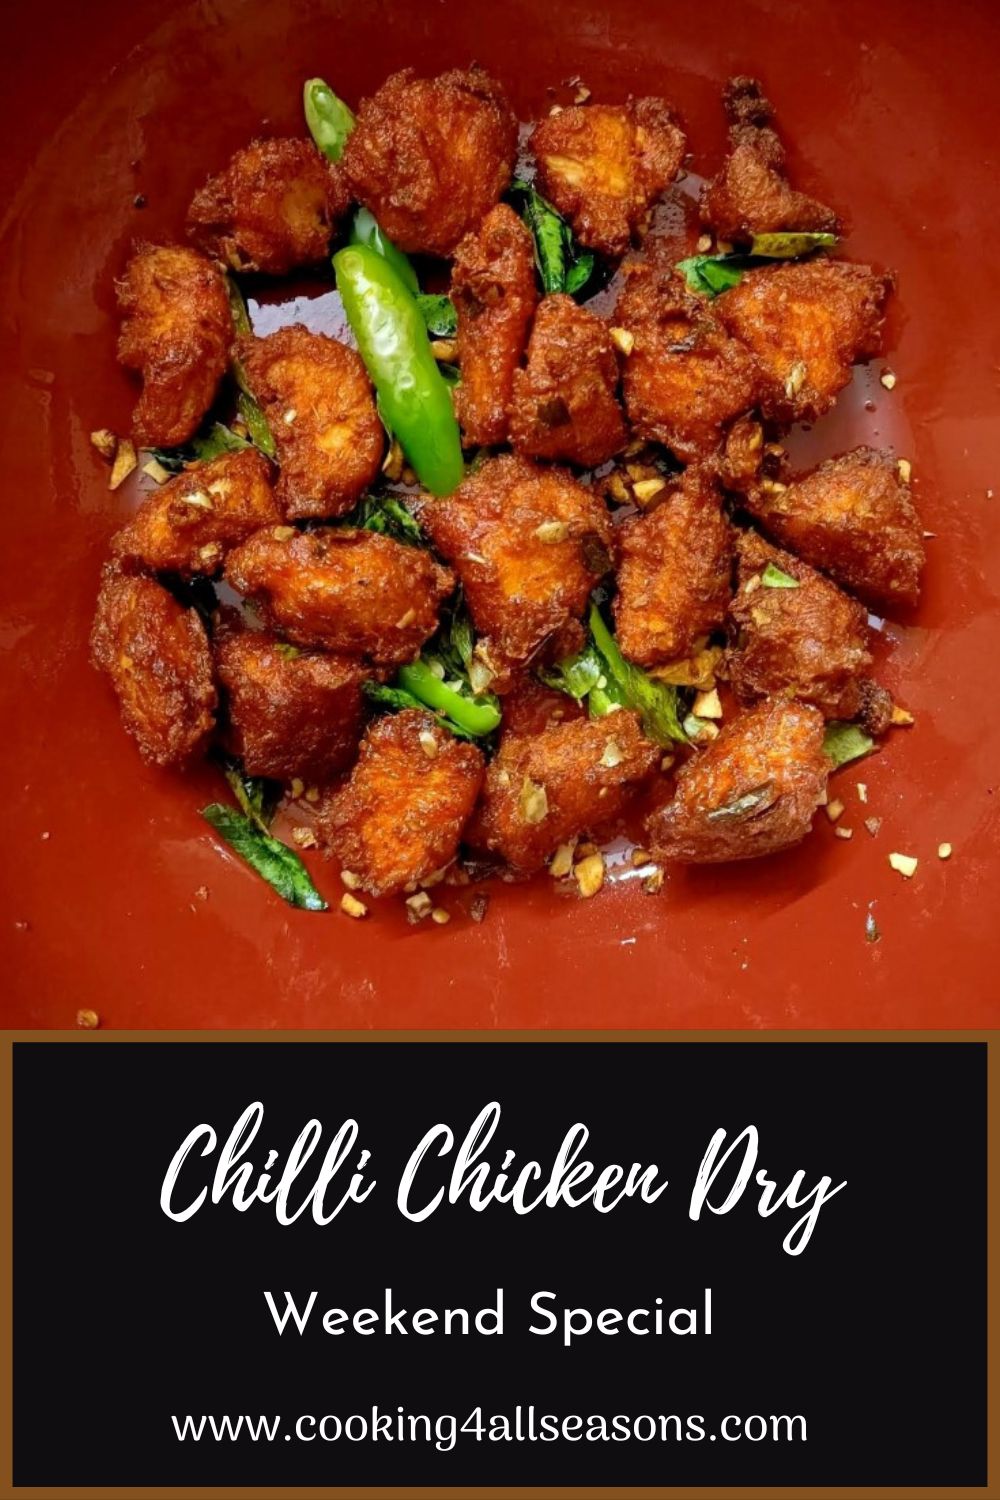 How to make Chilli Chicken Dry